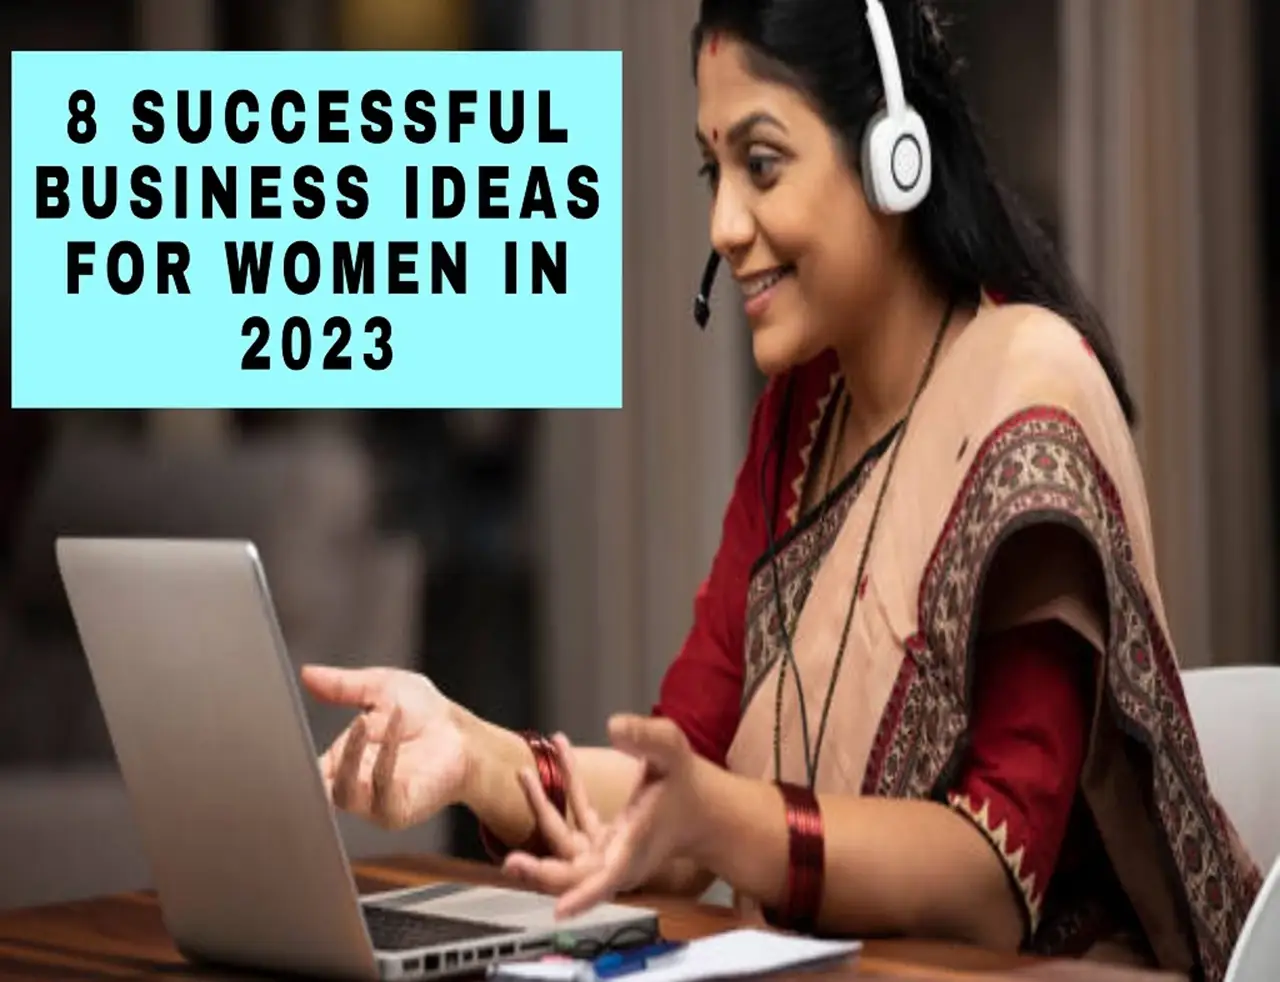 8 Businesses Women Can Start in 2023 to Make Huge Profit